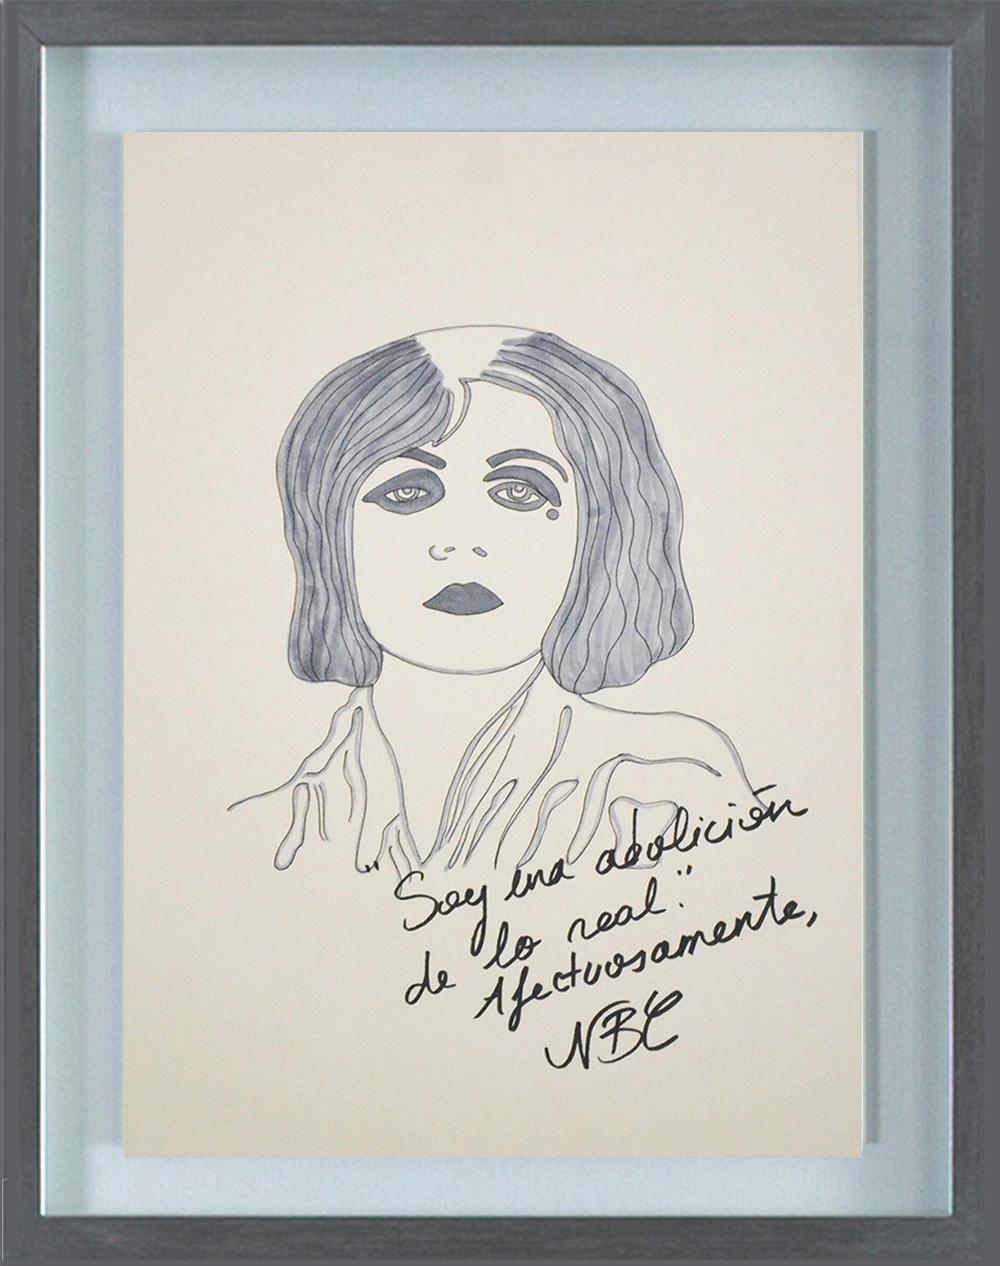 Pola Negri. Drawing From The Dis-enchanted series  - Art by Paloma Castello